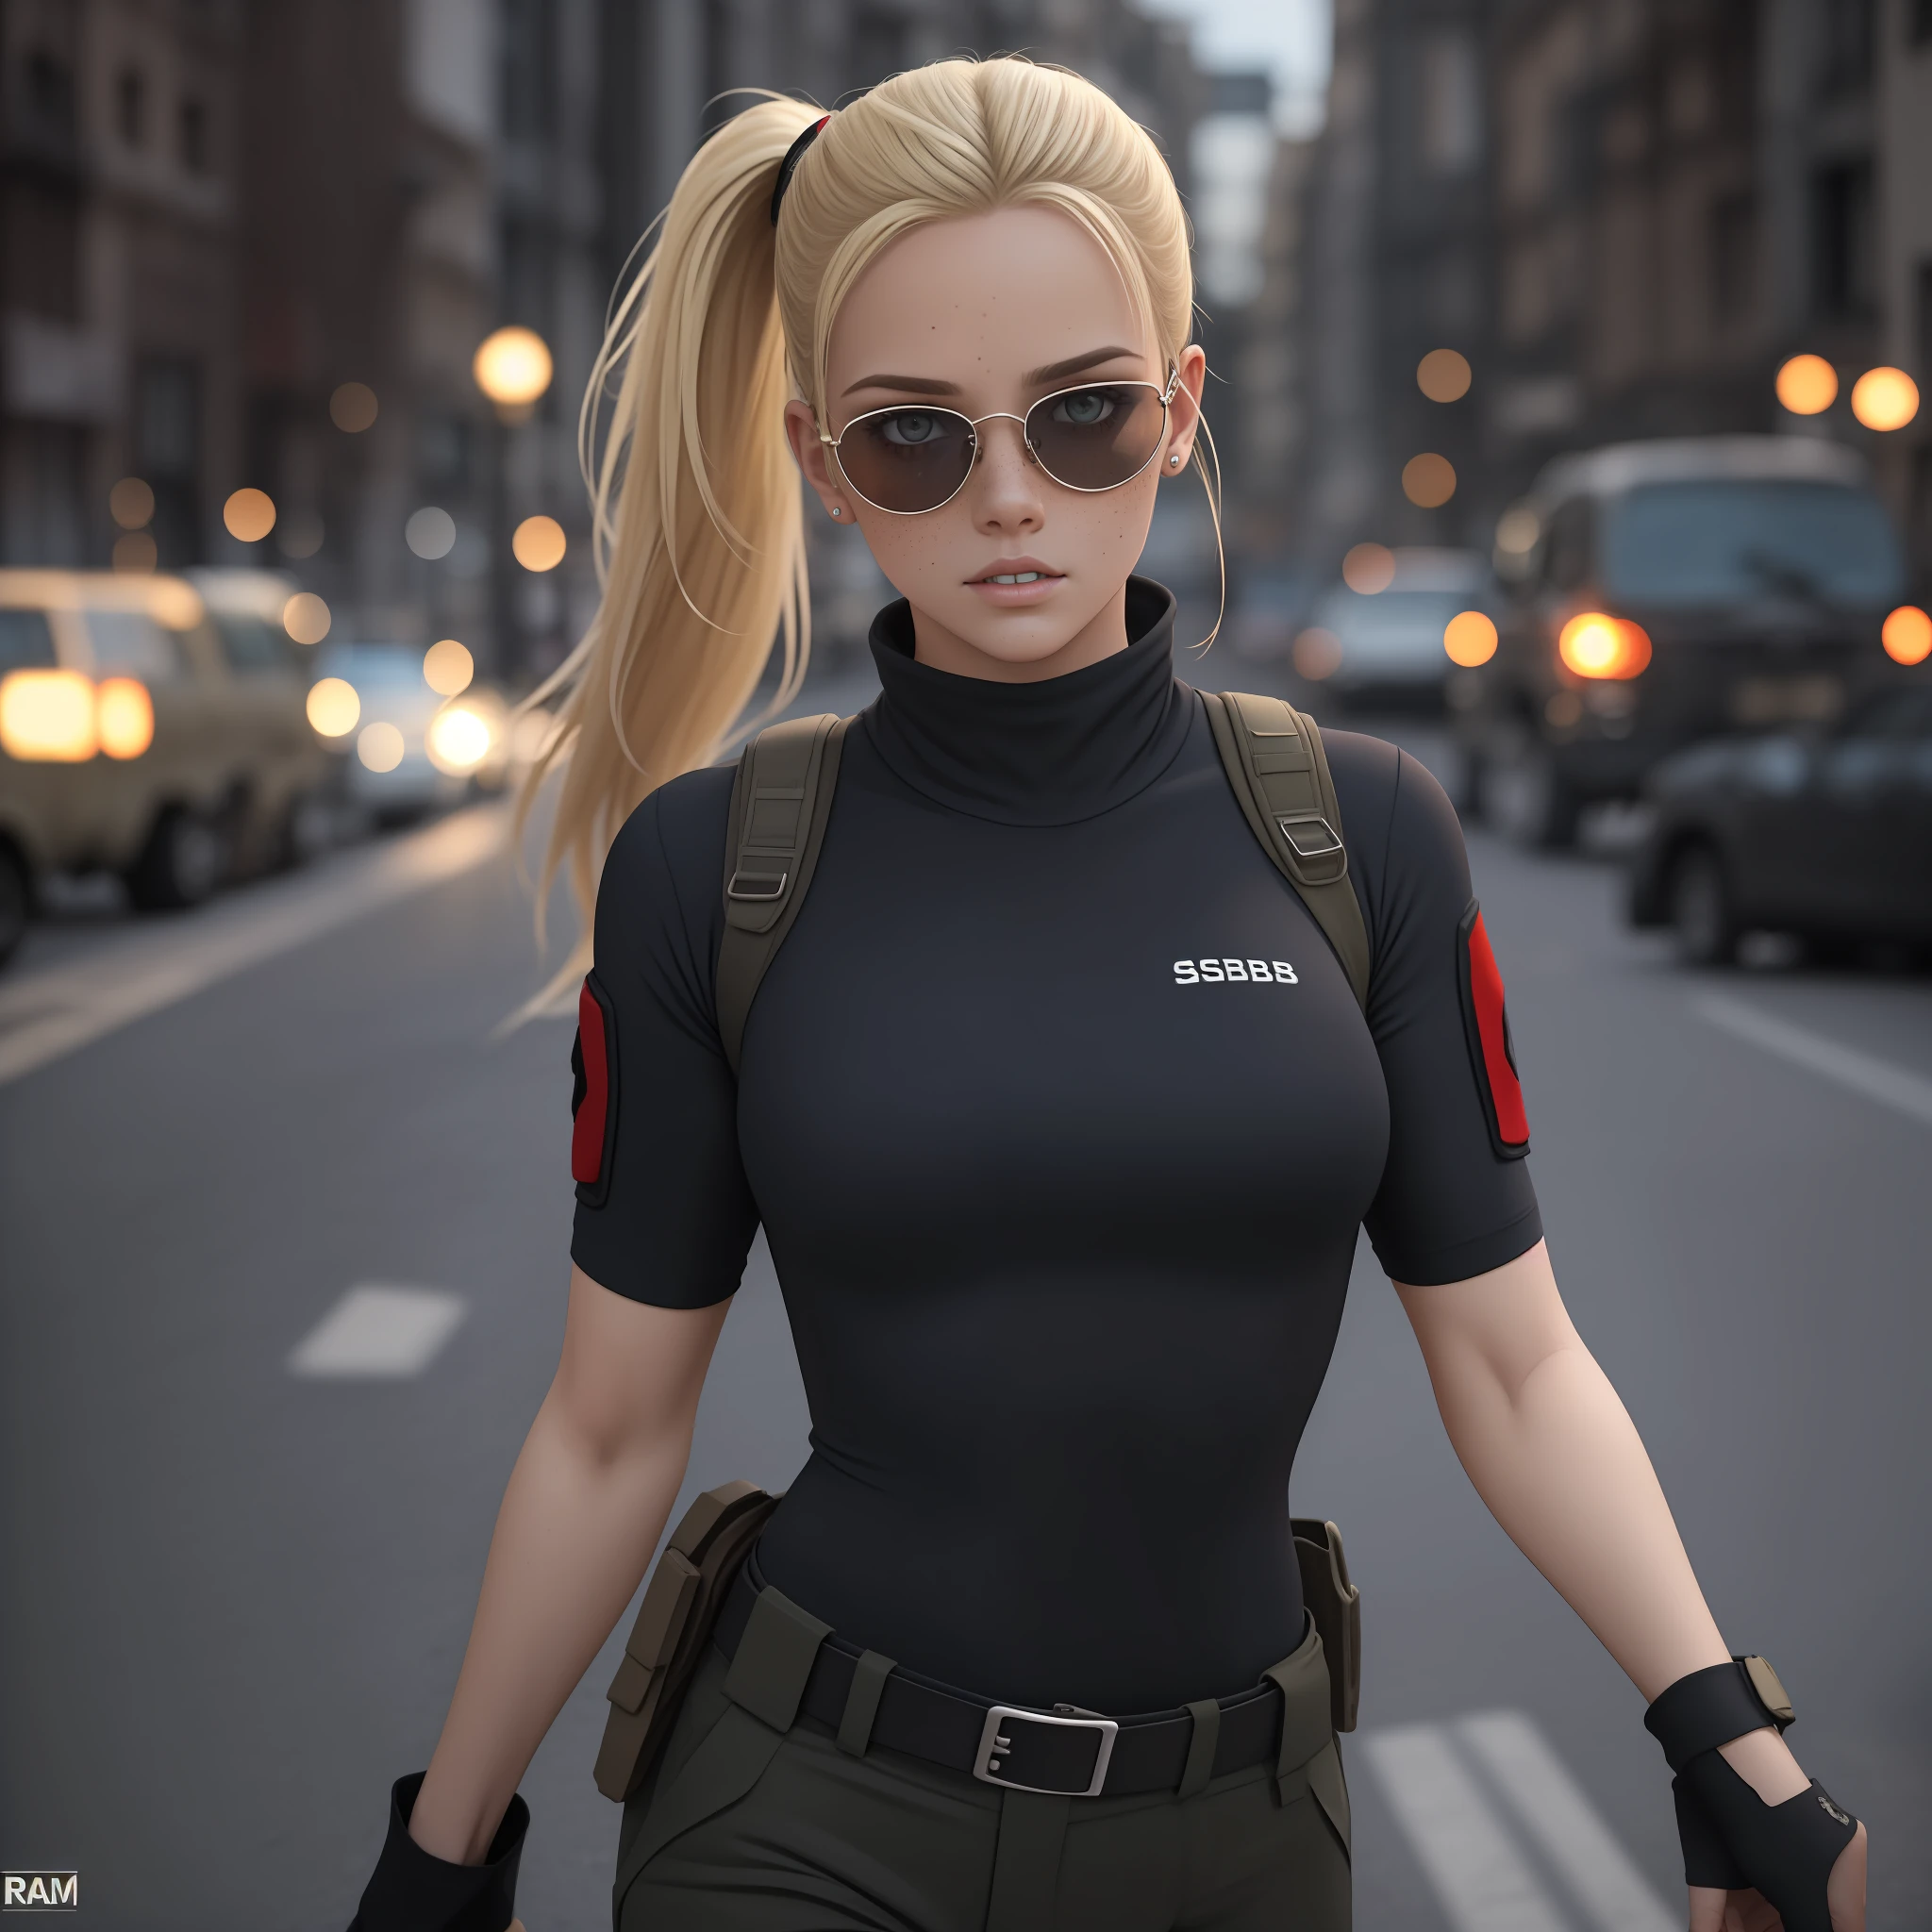 Cammy branco (Street Fighter), gray eyes, cabelo blondie cinza ponytail, pale skin and freckles, soft and beautiful lips, Aviator glasses with yellow transparent lenses, wearing tactical black baselayer, military office pants, black tractor boots, carrying an M4A1 assault rifle, preparing to attack and ambush, Moscow streets at war. Night under street lights. naturallight, poor lighting, photorrealistic, hard disk, 8k, ​masterpiece, hard driveR, .RAW, gazing